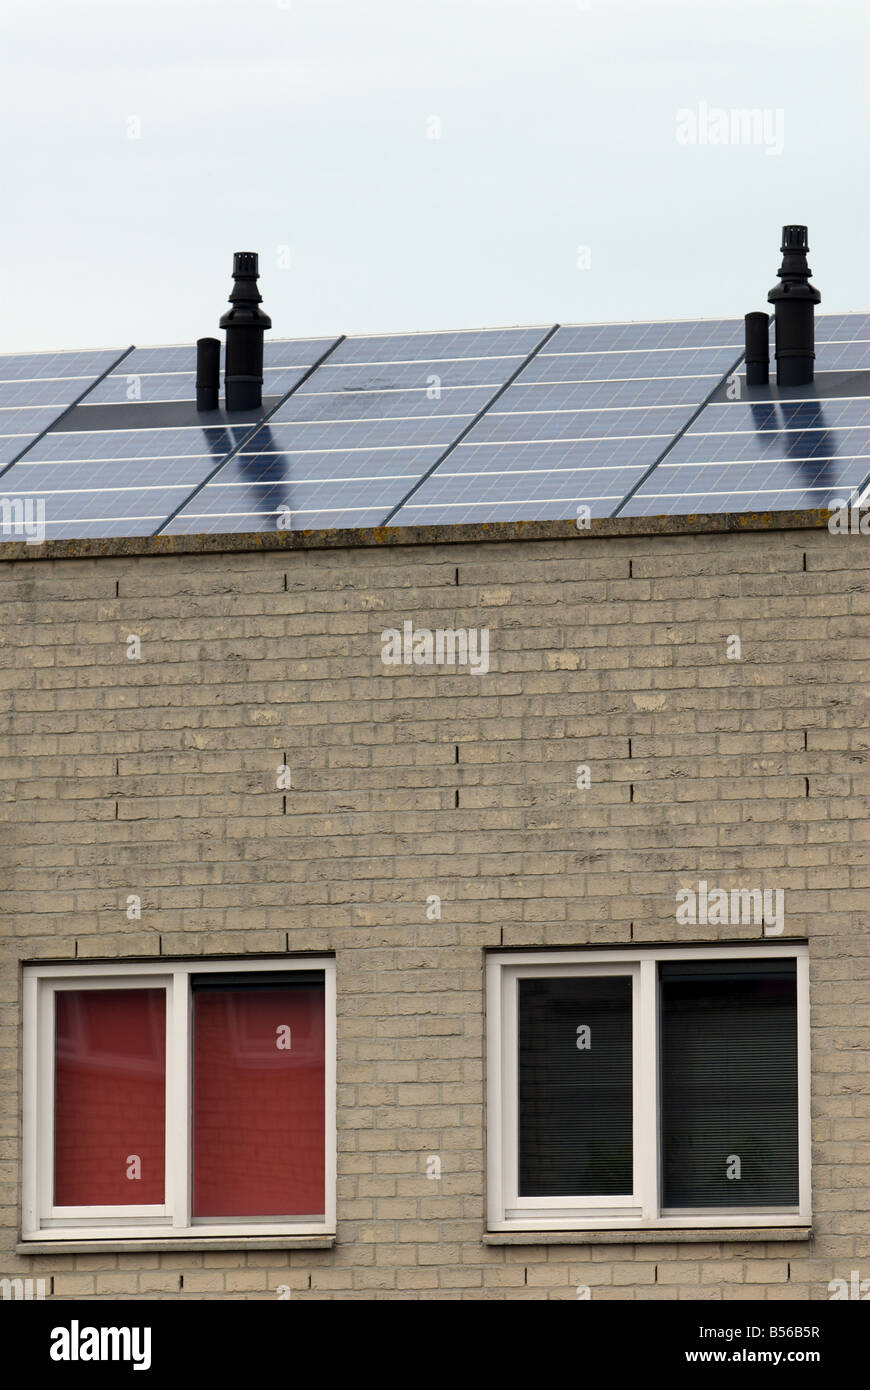 Shell solar panels fitted to apartments on the world's largest solar powered housing estate, Nieuwland, Amersfoort, Netherlands. Stock Photo